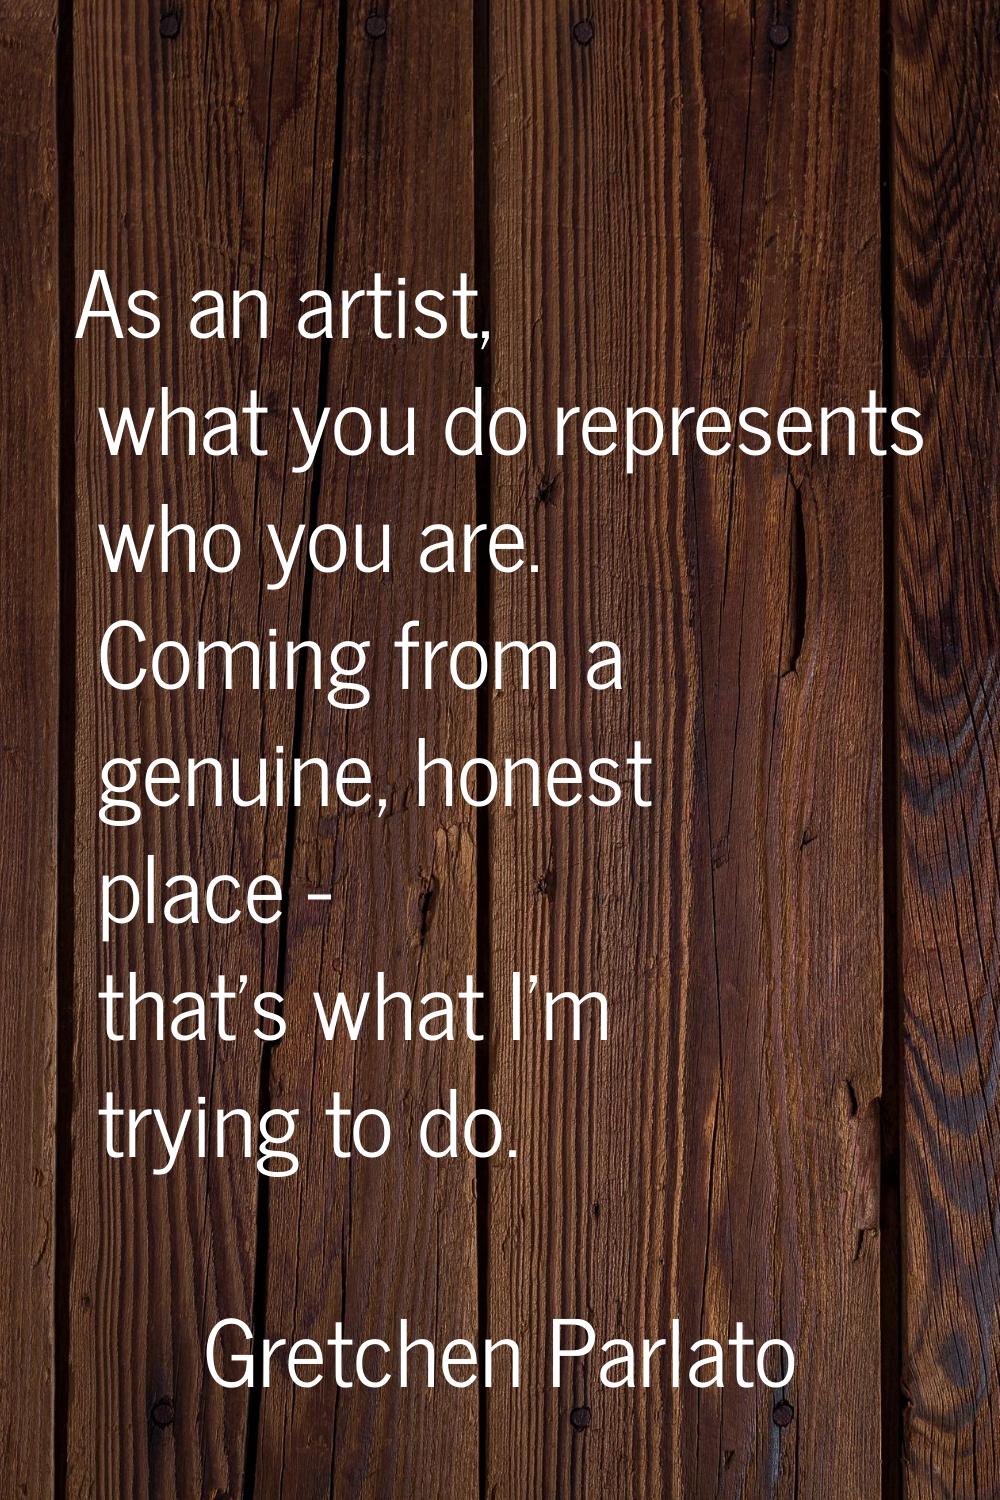 As an artist, what you do represents who you are. Coming from a genuine, honest place - that's what